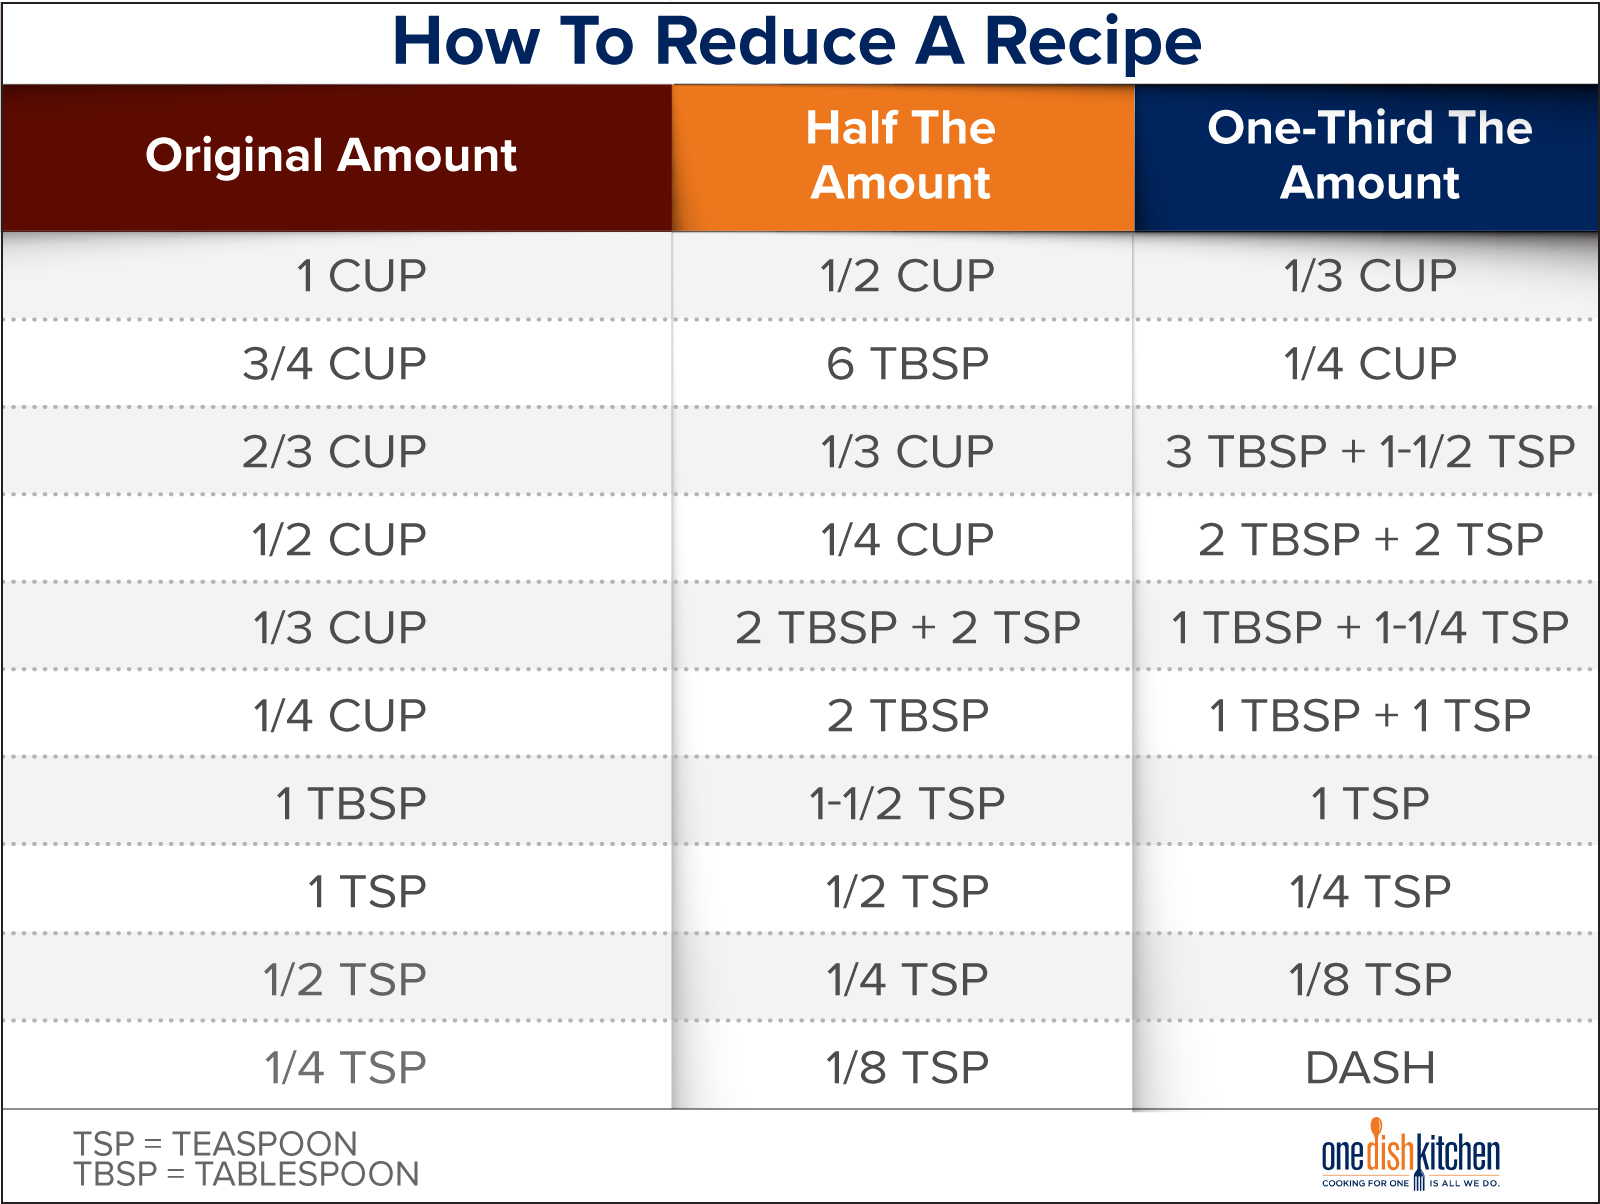 https://onedishkitchen.com/products/How-to-Reduce-a-Aecipe-Measurement-Table-OneDishKitchen.jpg